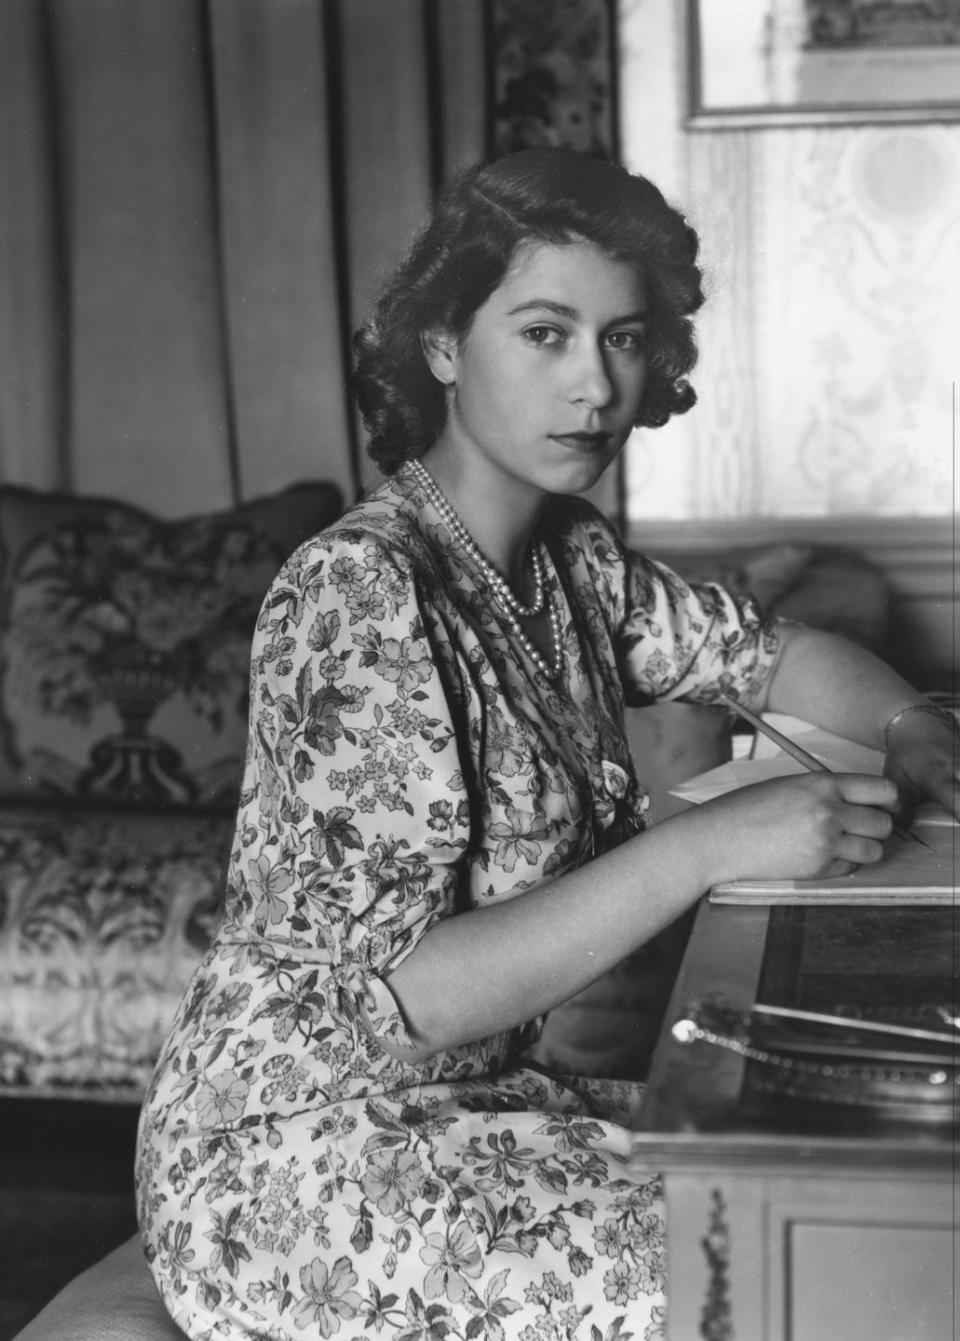 princess elizabeth looks at the camera while sitting at a desk and writing, she wears a floral dress and a double stranded pearl necklace